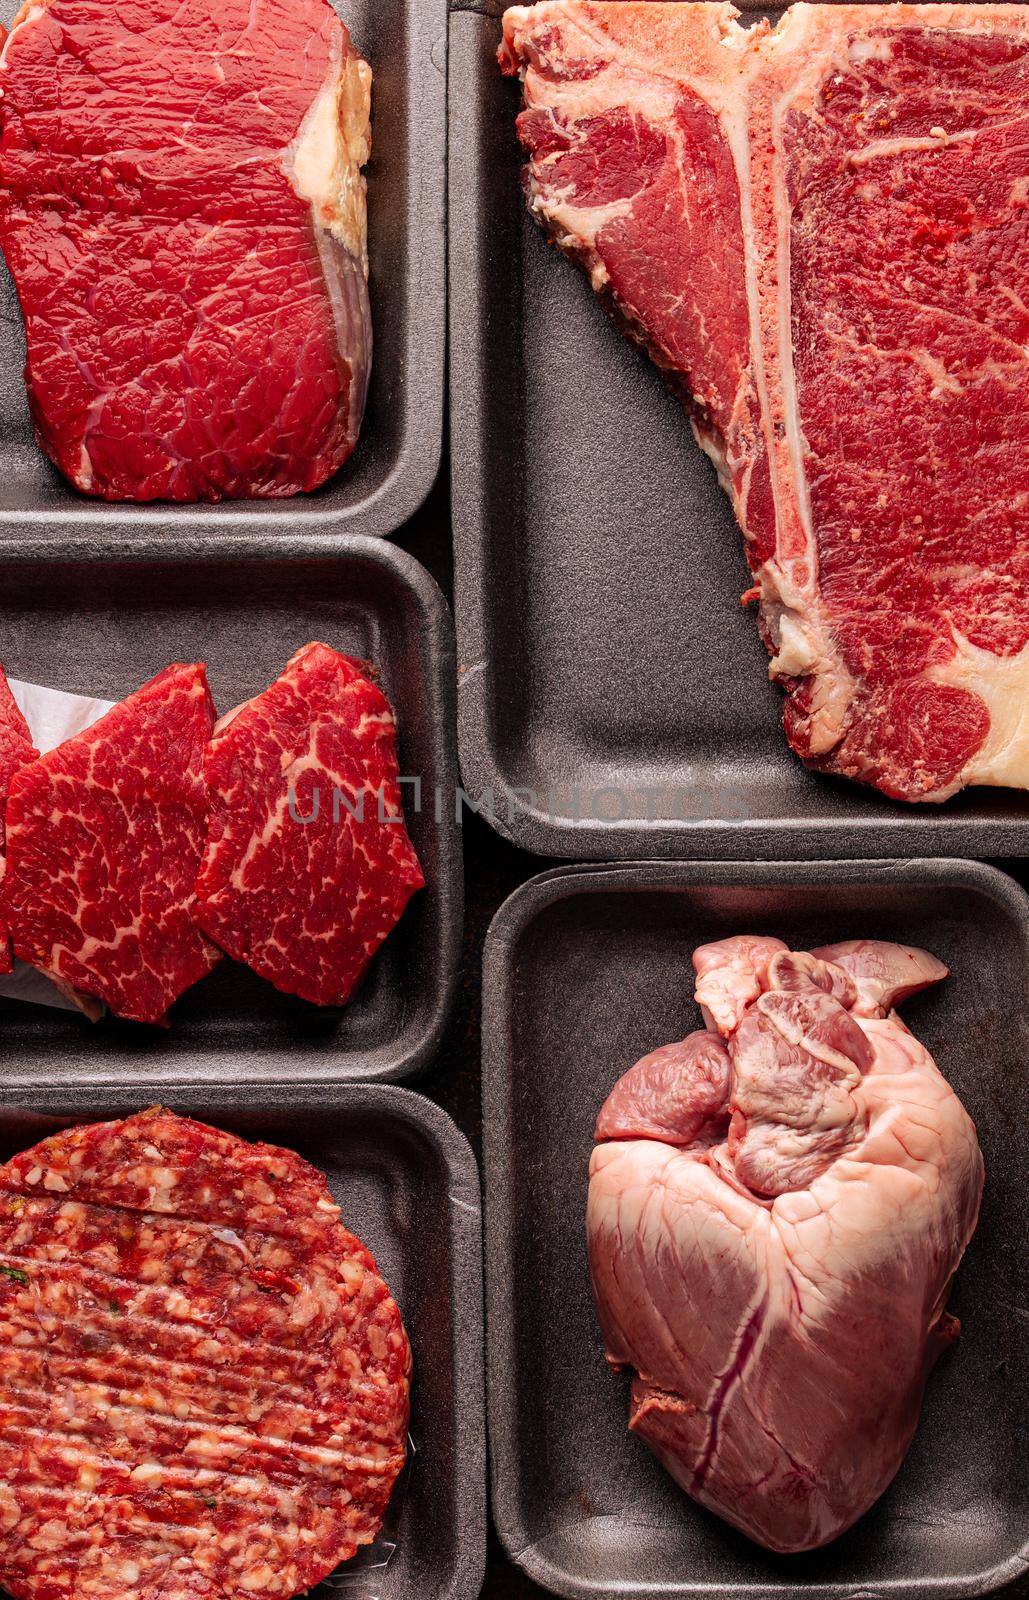 Black plastic packaging trays from supermarket with different types of fresh raw meat cuts, fresh beefbeef steaks and variety meats in boxes from above